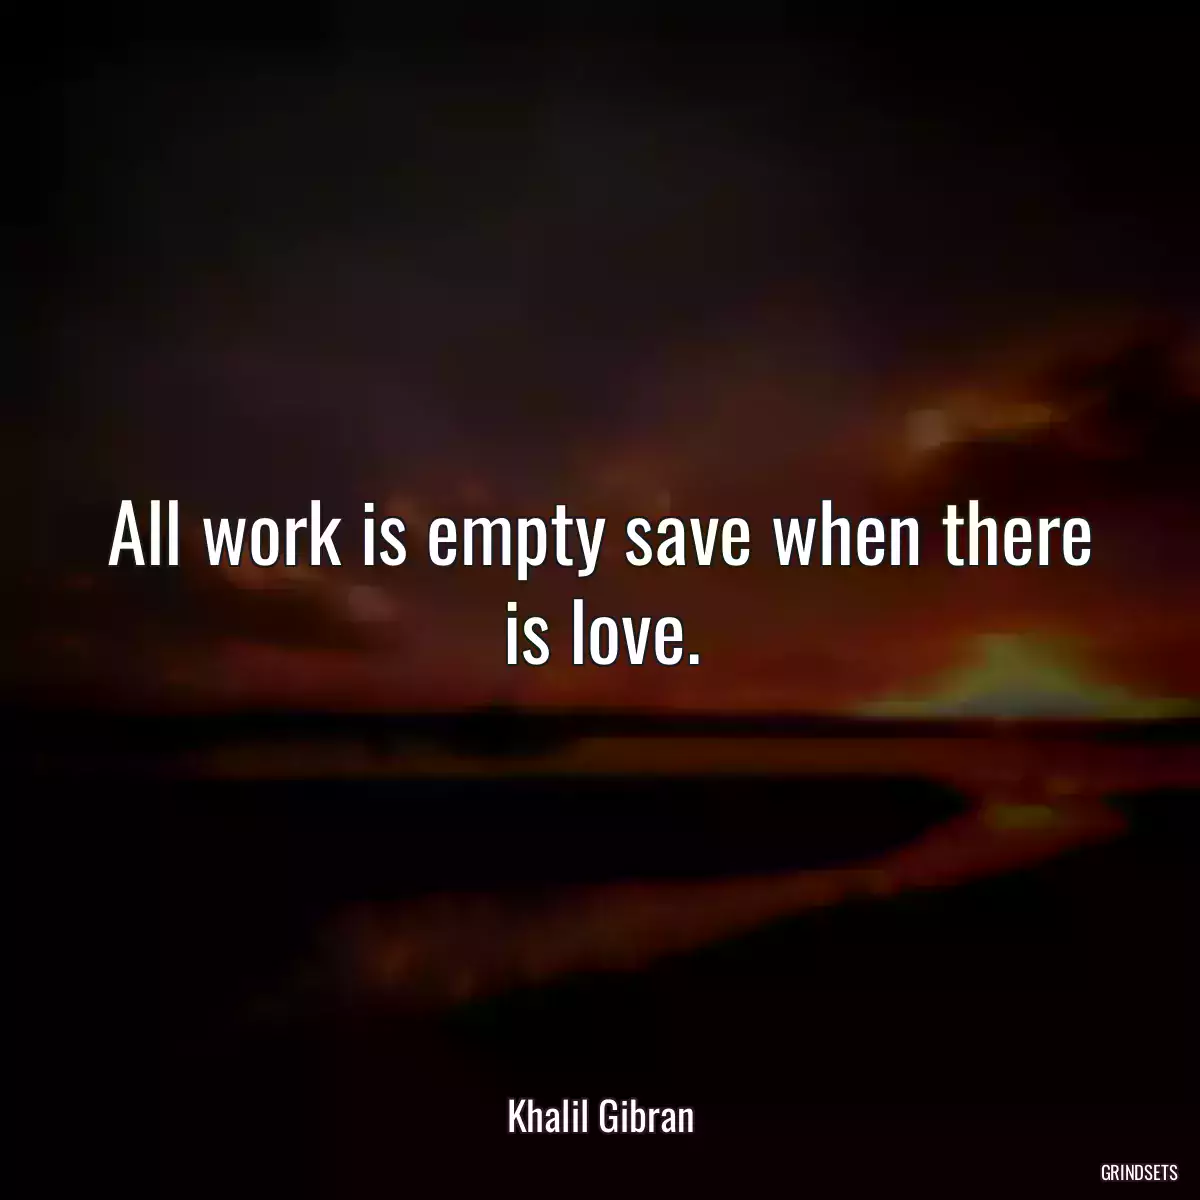 All work is empty save when there is love.